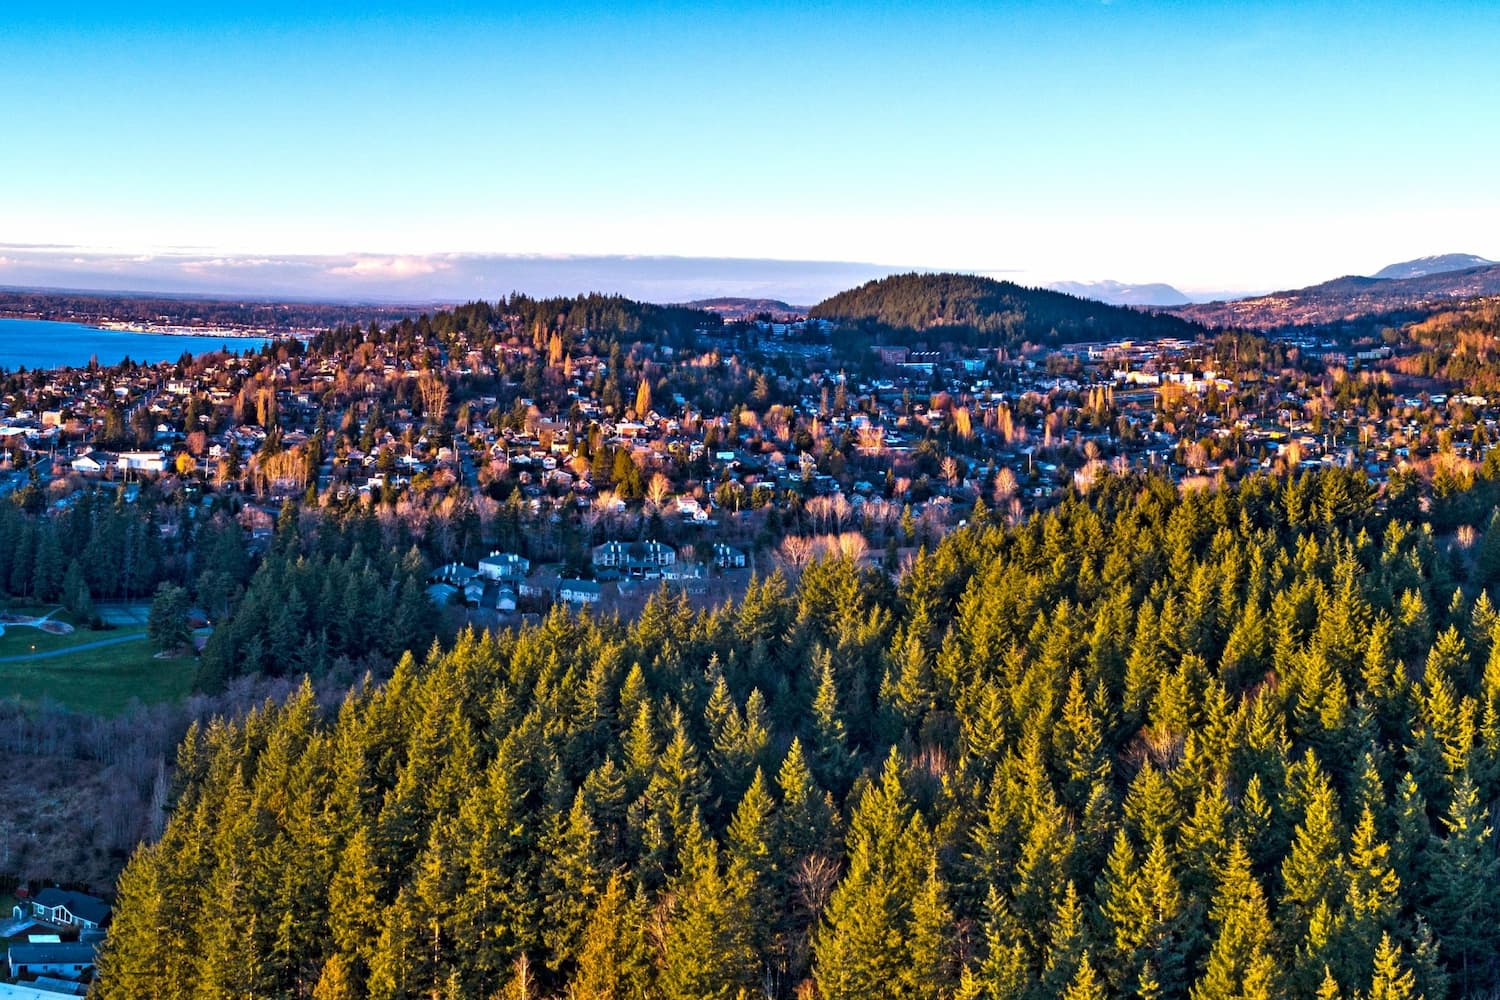 Aerial view of the city of Bellingham